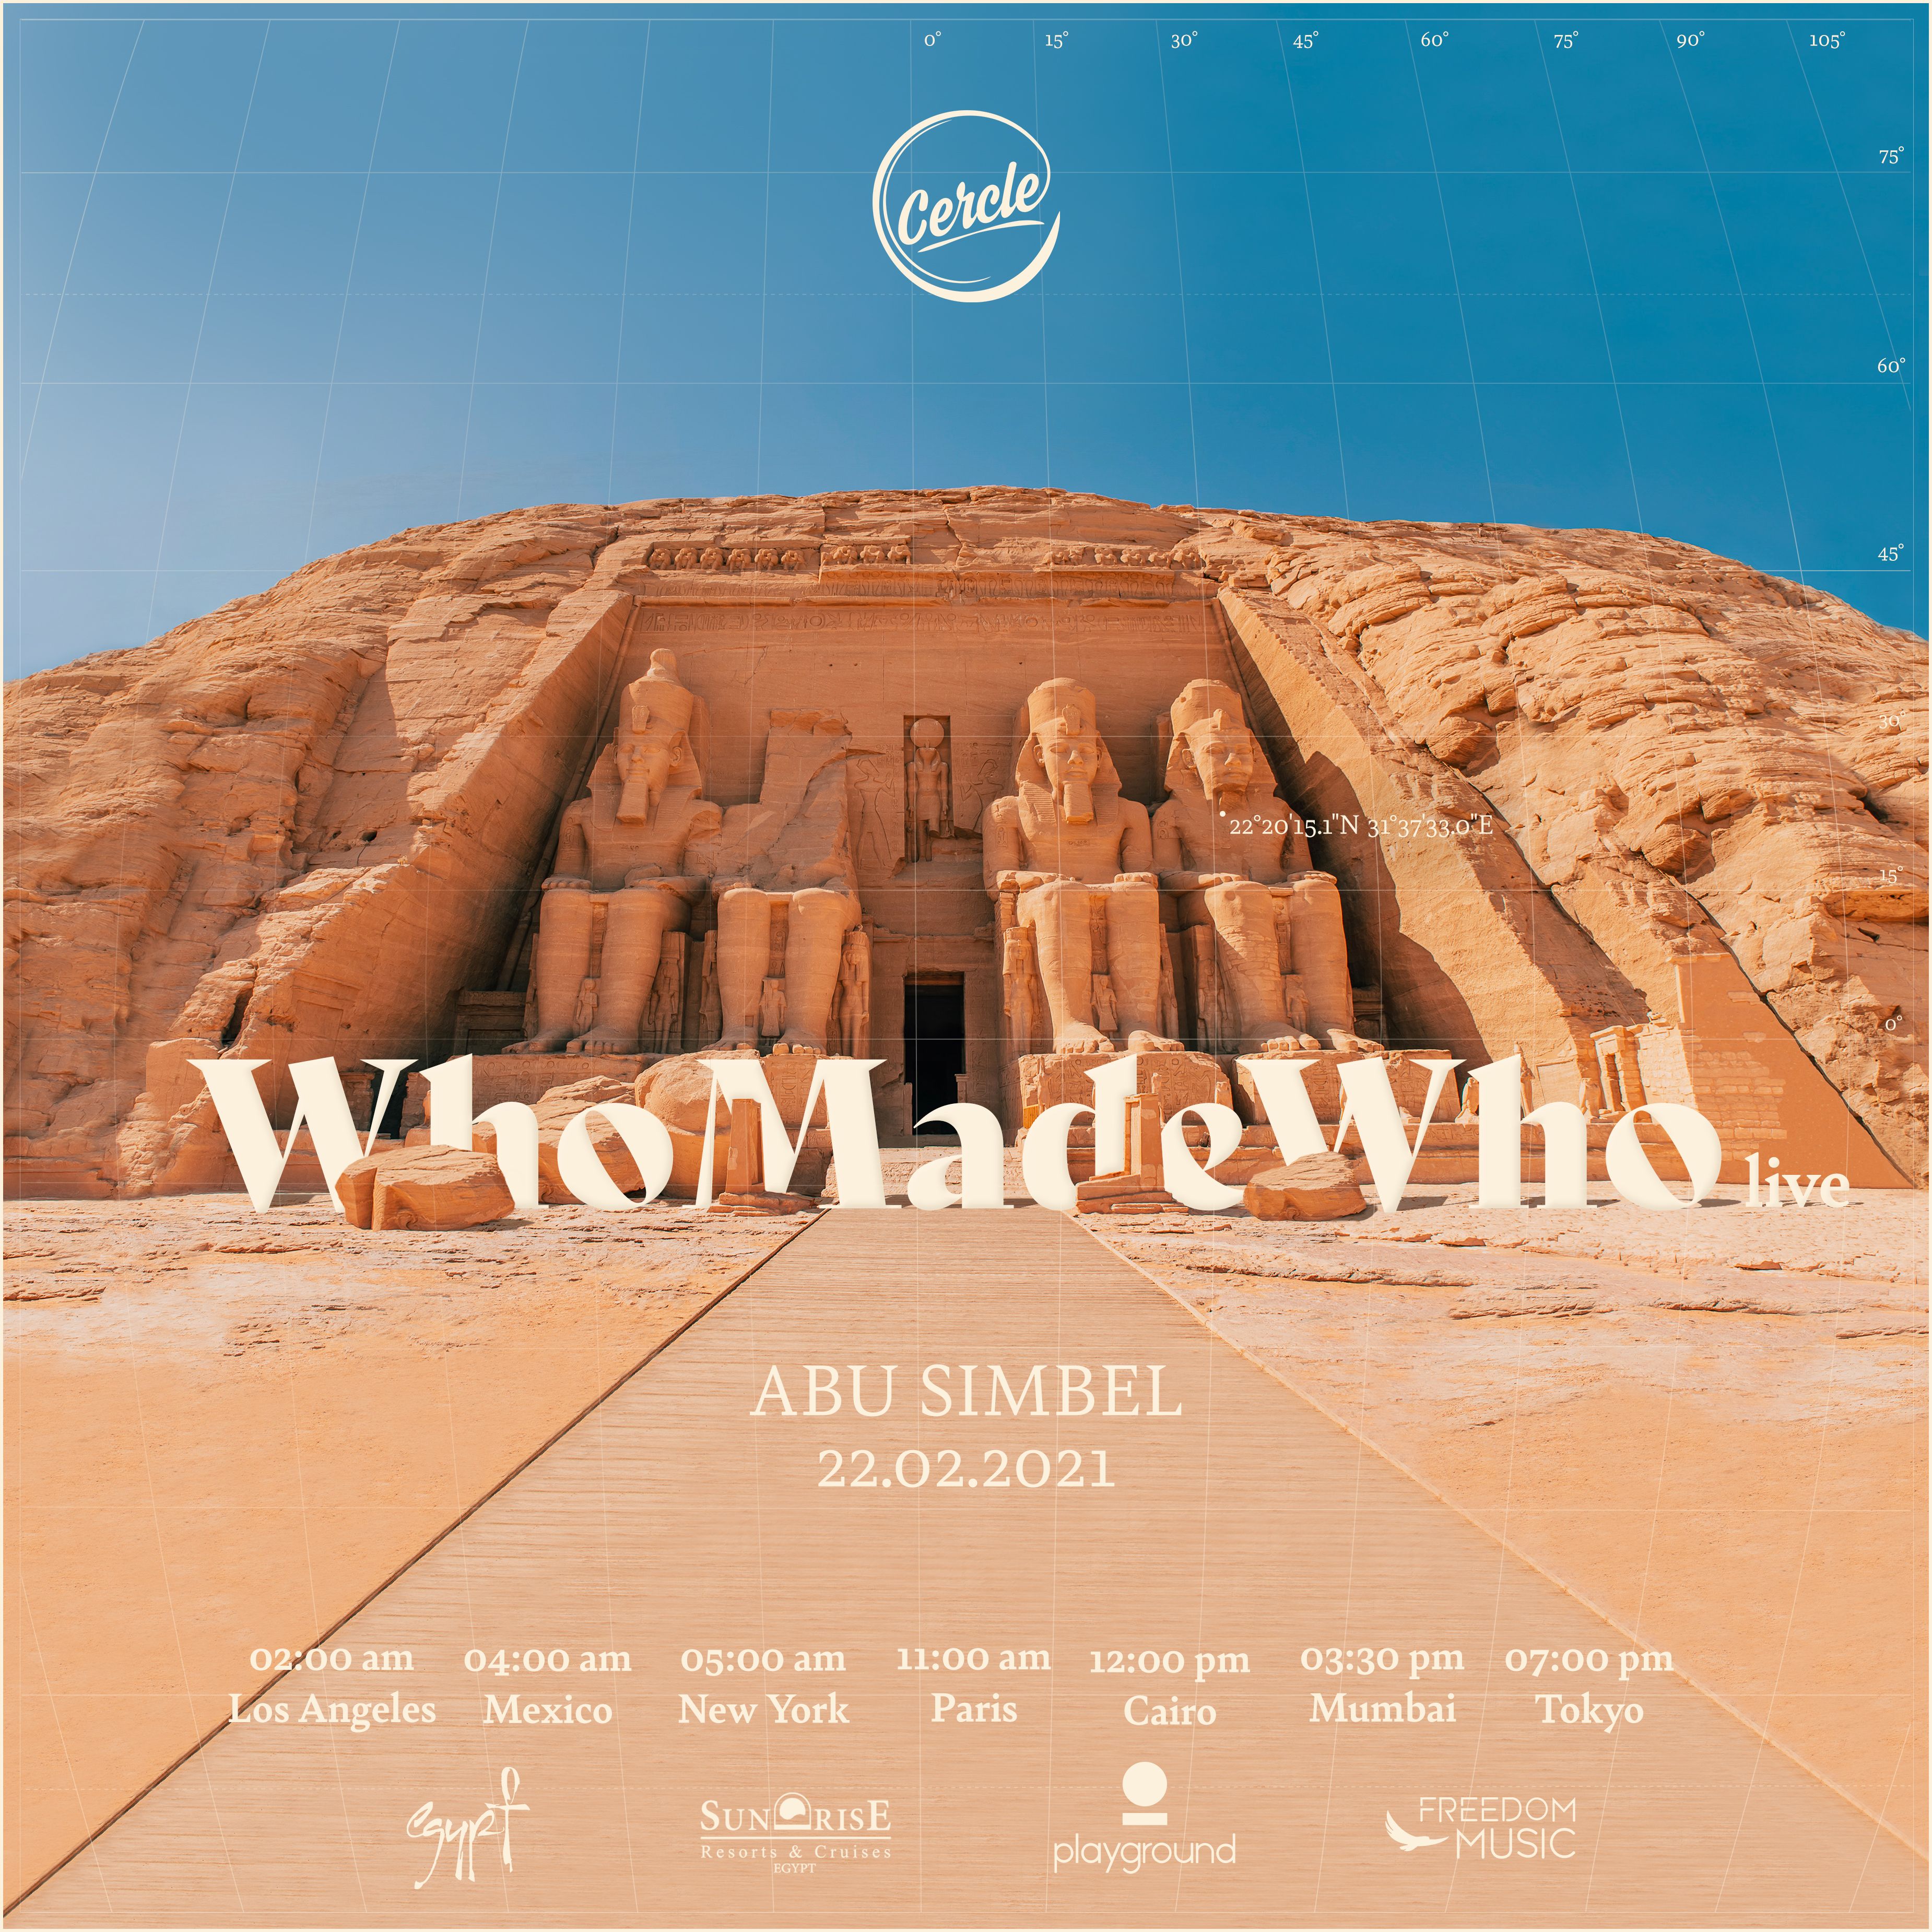 Scaricamento WhoMadeWho live at Abu Simbel, Egypt for Cercle